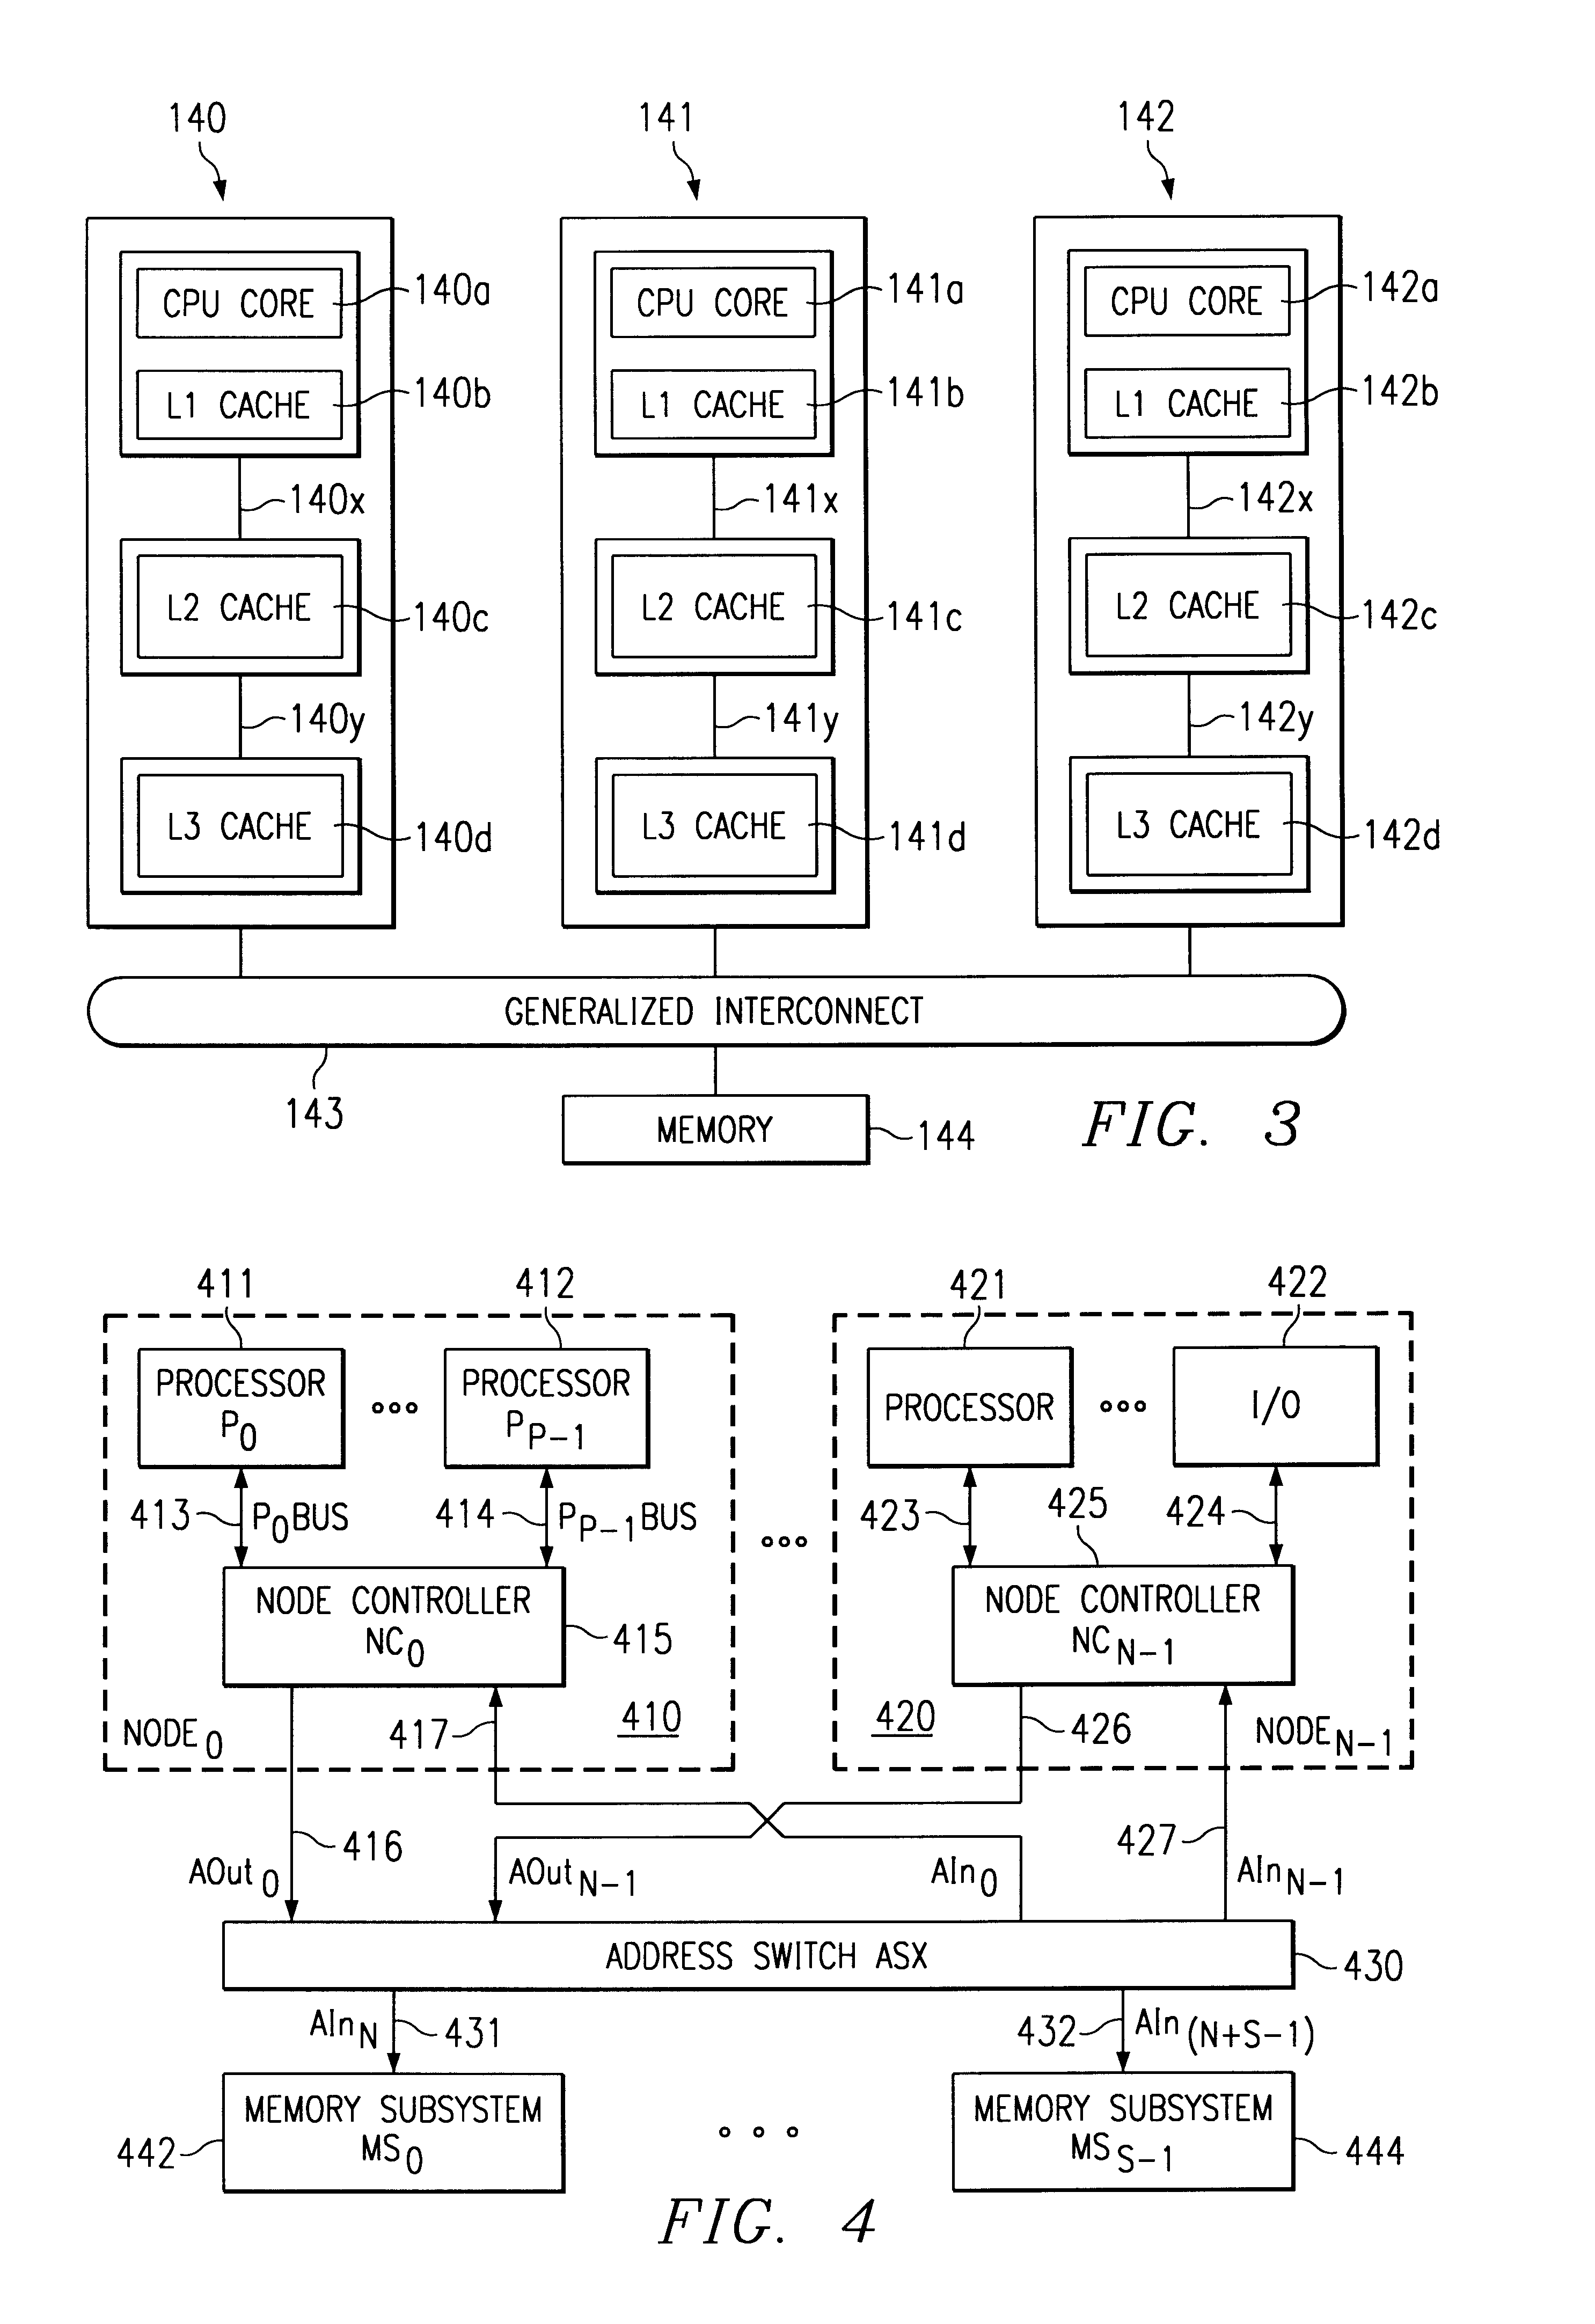 Method and apparatus for avoiding data bus grant starvation in a non-fair, prioritized arbiter for a split bus system with independent address and data bus grants